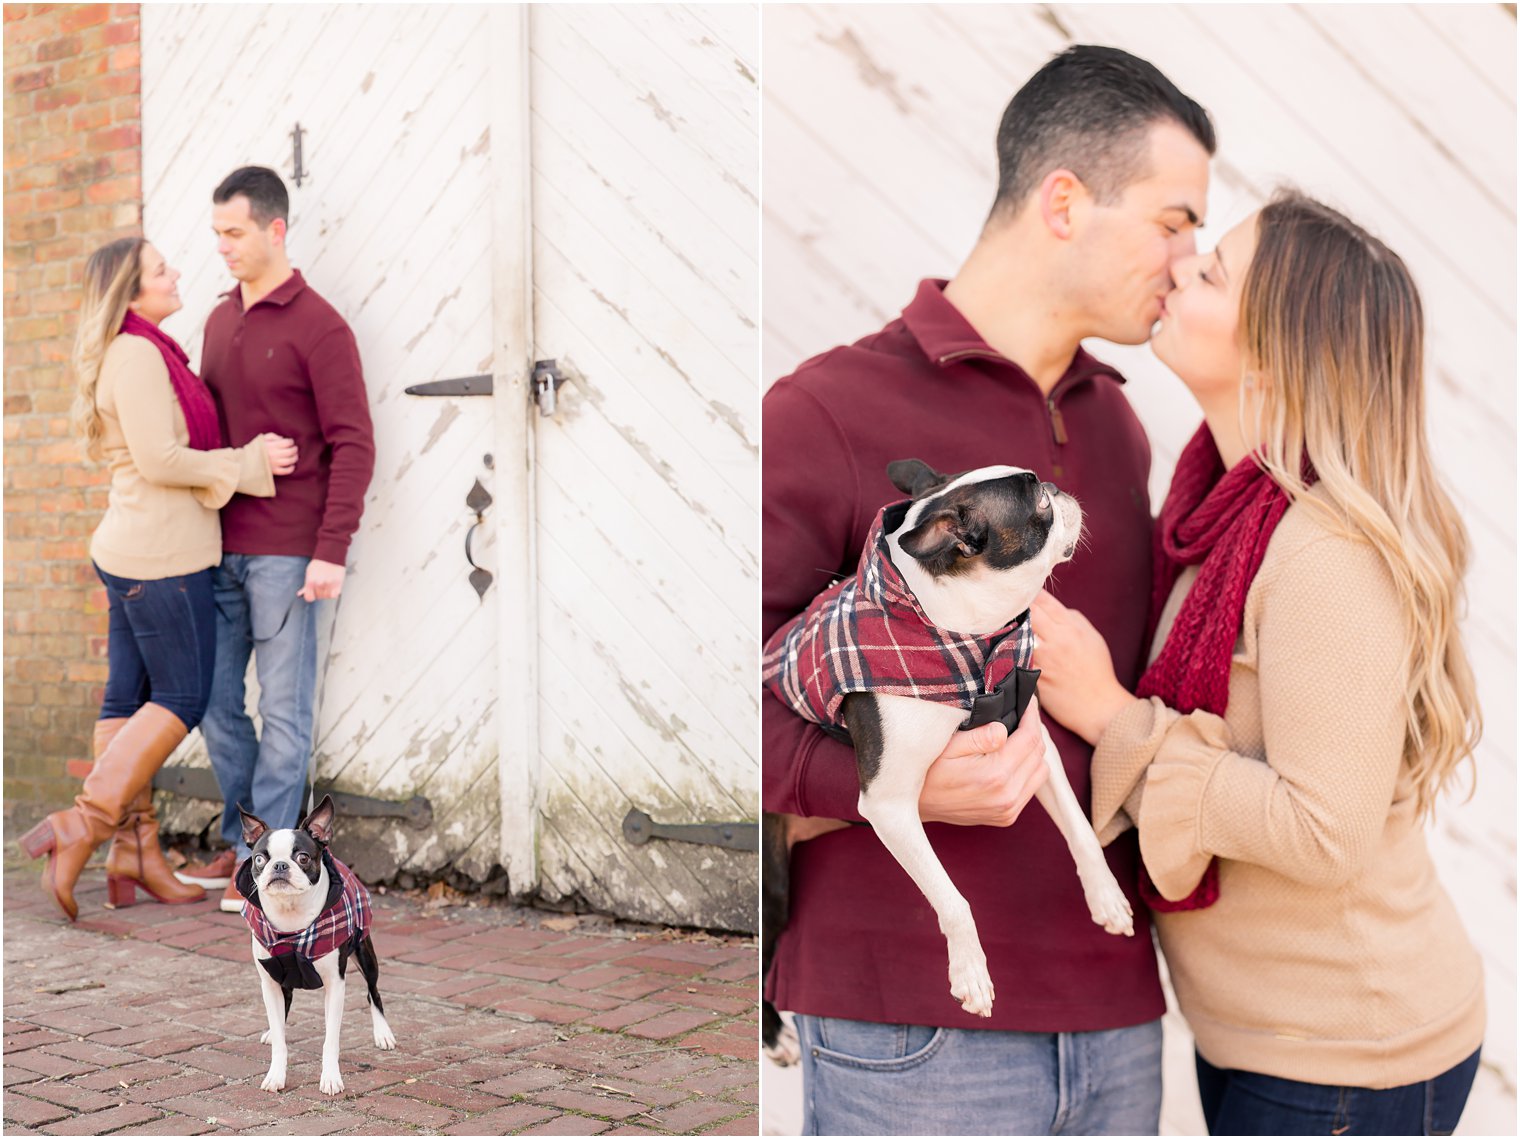 How to include dog in your engagement photos